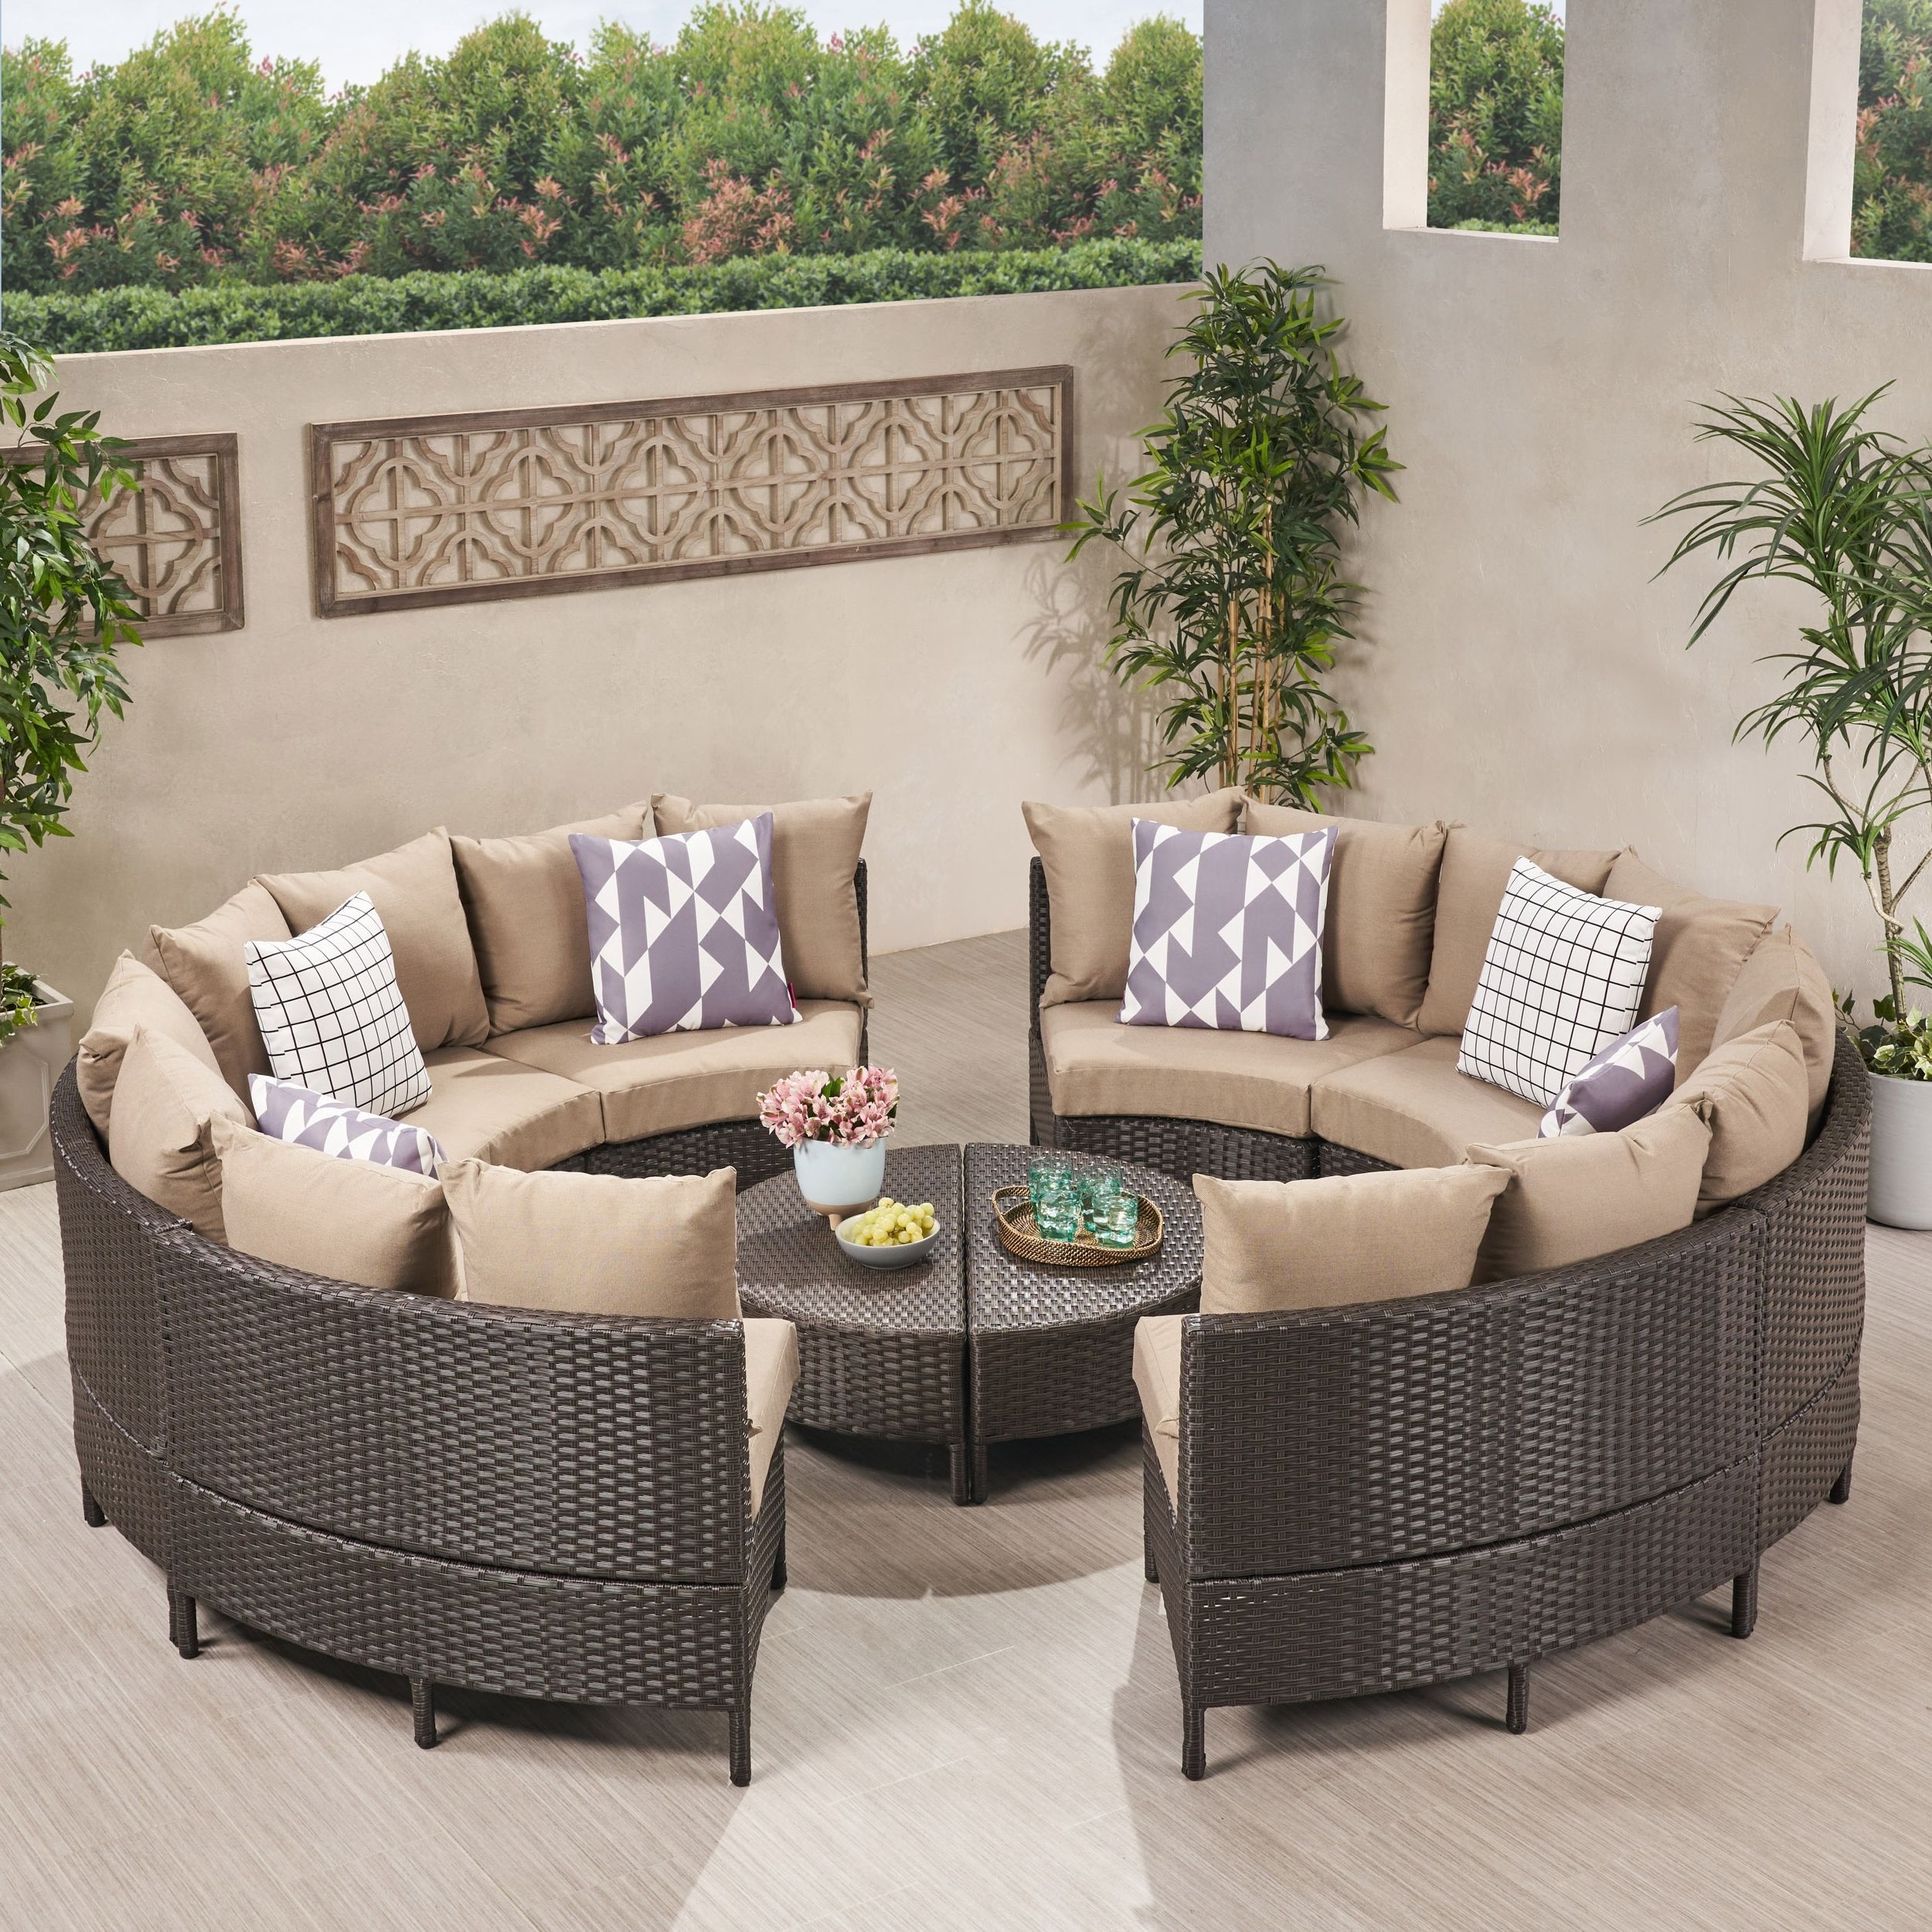 Newton All Weather Wicker Sectional Sofa Setchristopher Knight Home –  On Sale – – 20598608 With Regard To Most Up To Date Outdoor Rattan Sectional Sofas With Coffee Table (Photo 9 of 15)